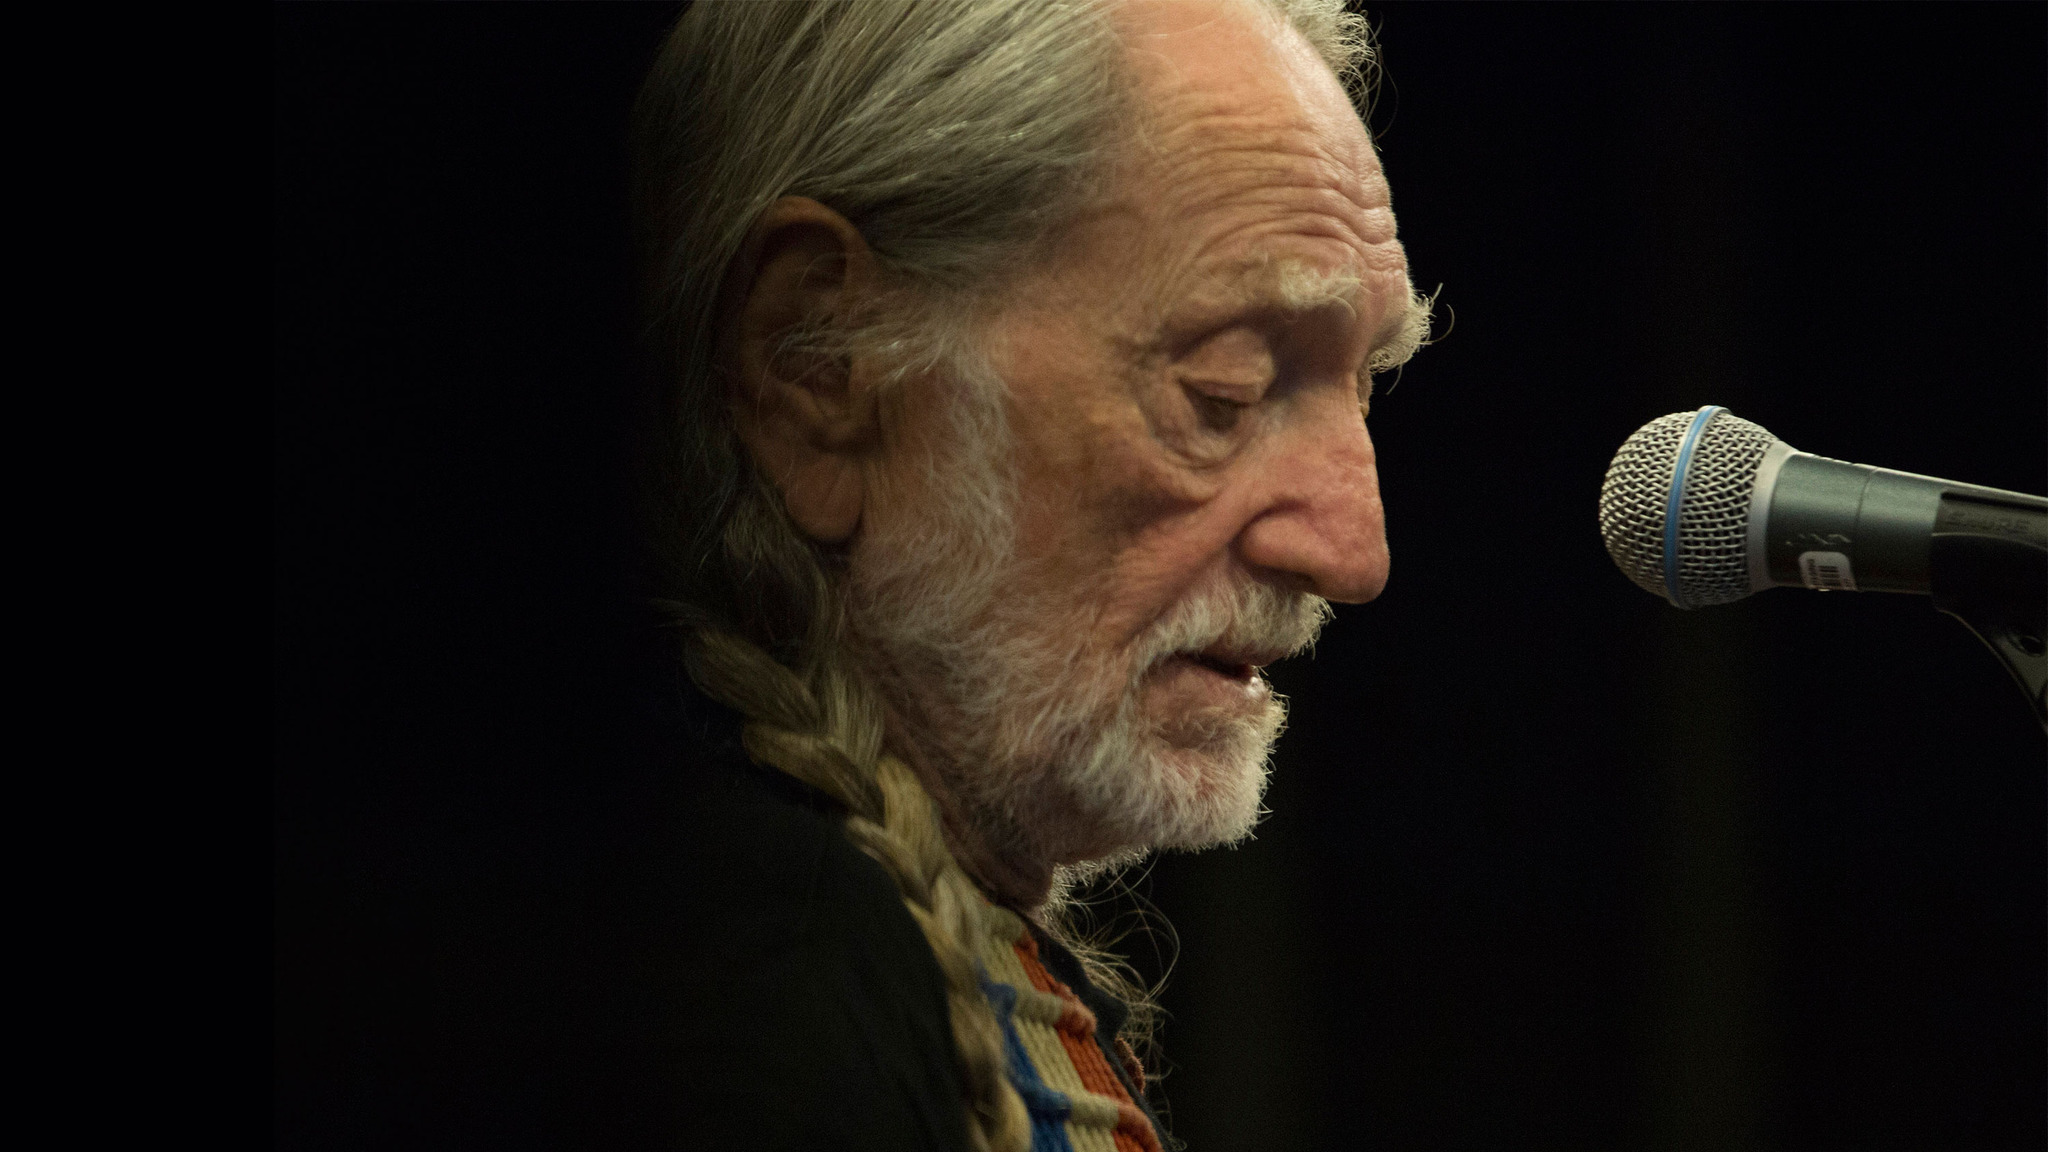 Willie Nelson's 4th of July PIcnic with Bob Dylan, Robert Plant & More